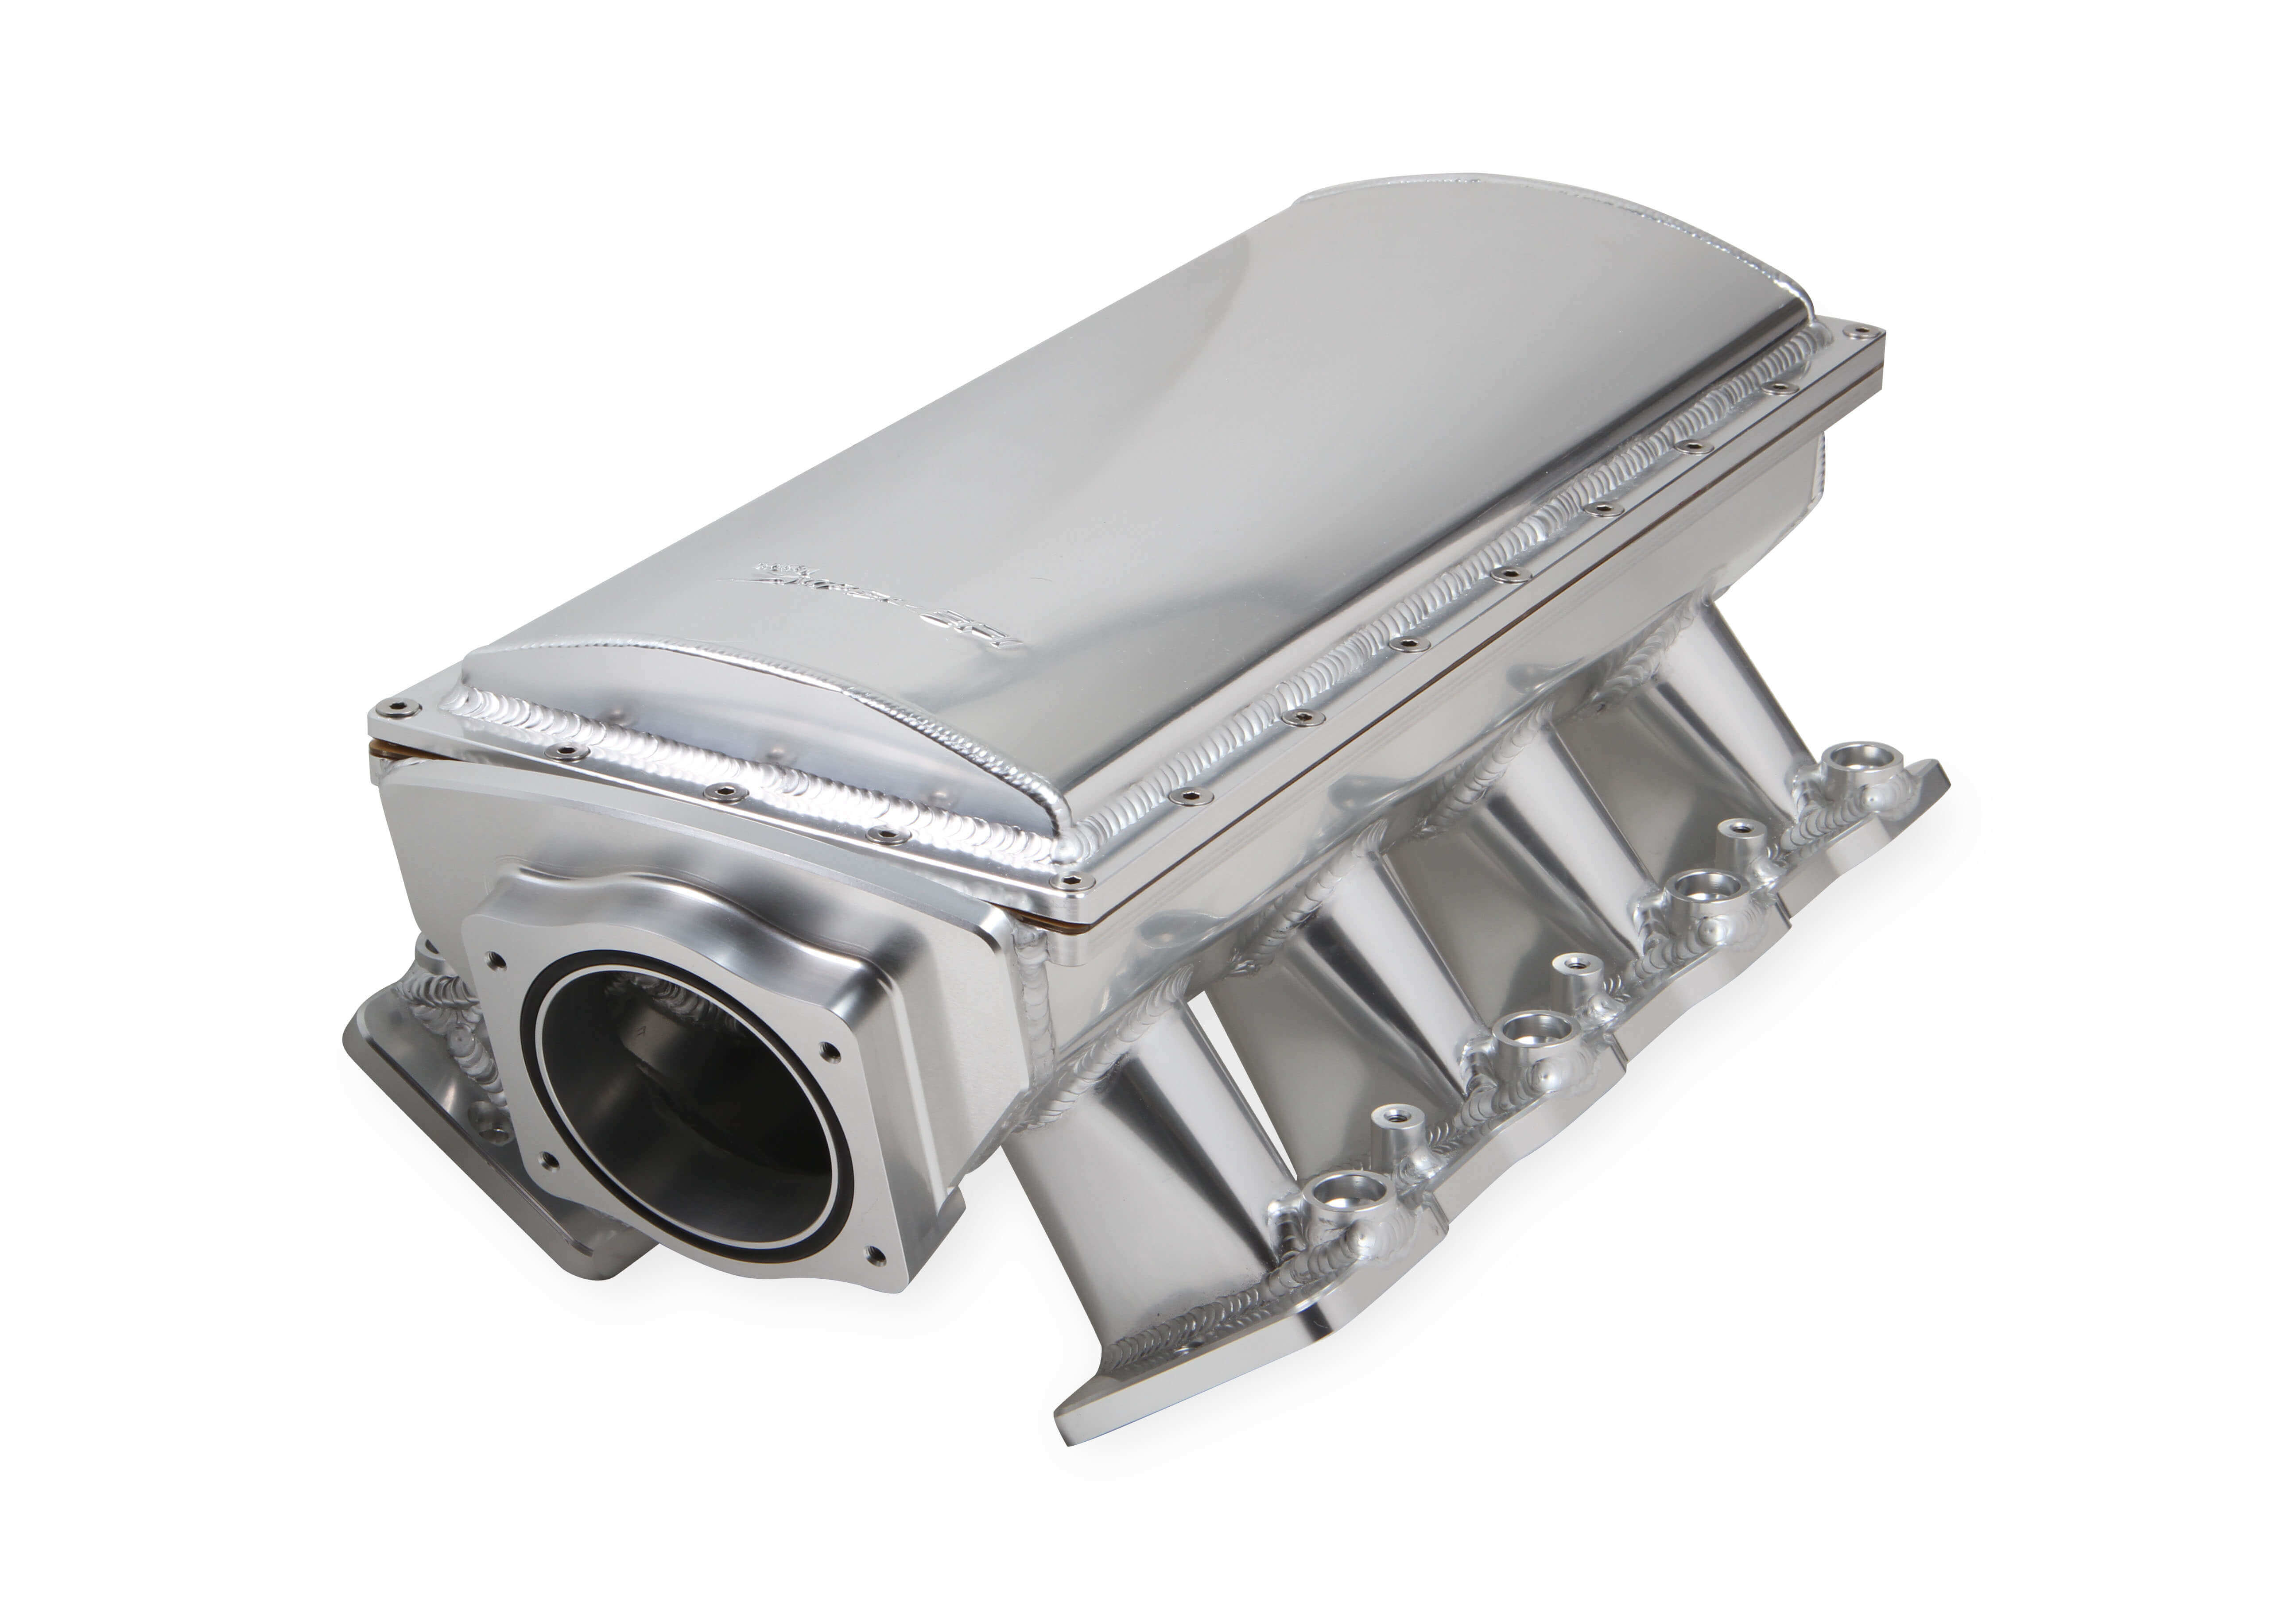 LS3/L92 Holley Sniper EFI Fabricated Race Series Intake Manifold - 90mm Silver